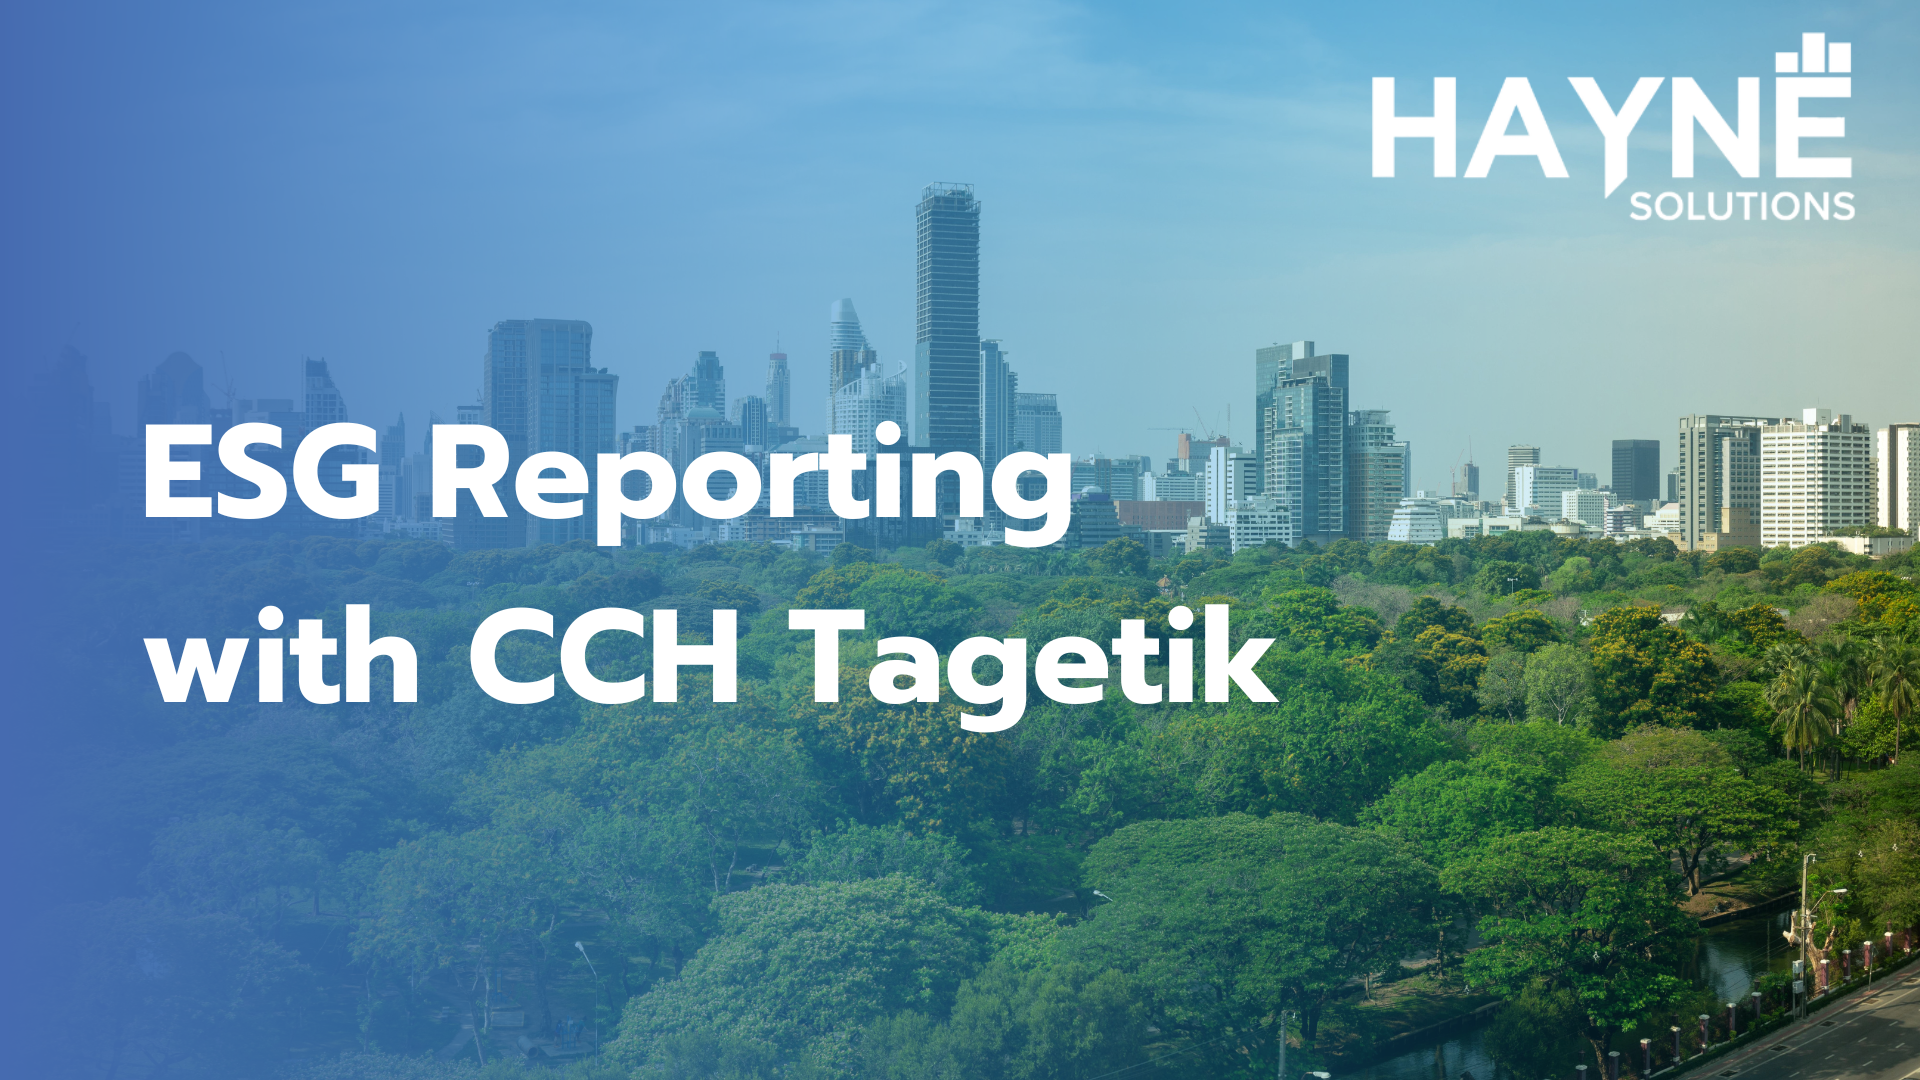 ESG Reporting with CCH Tagetik